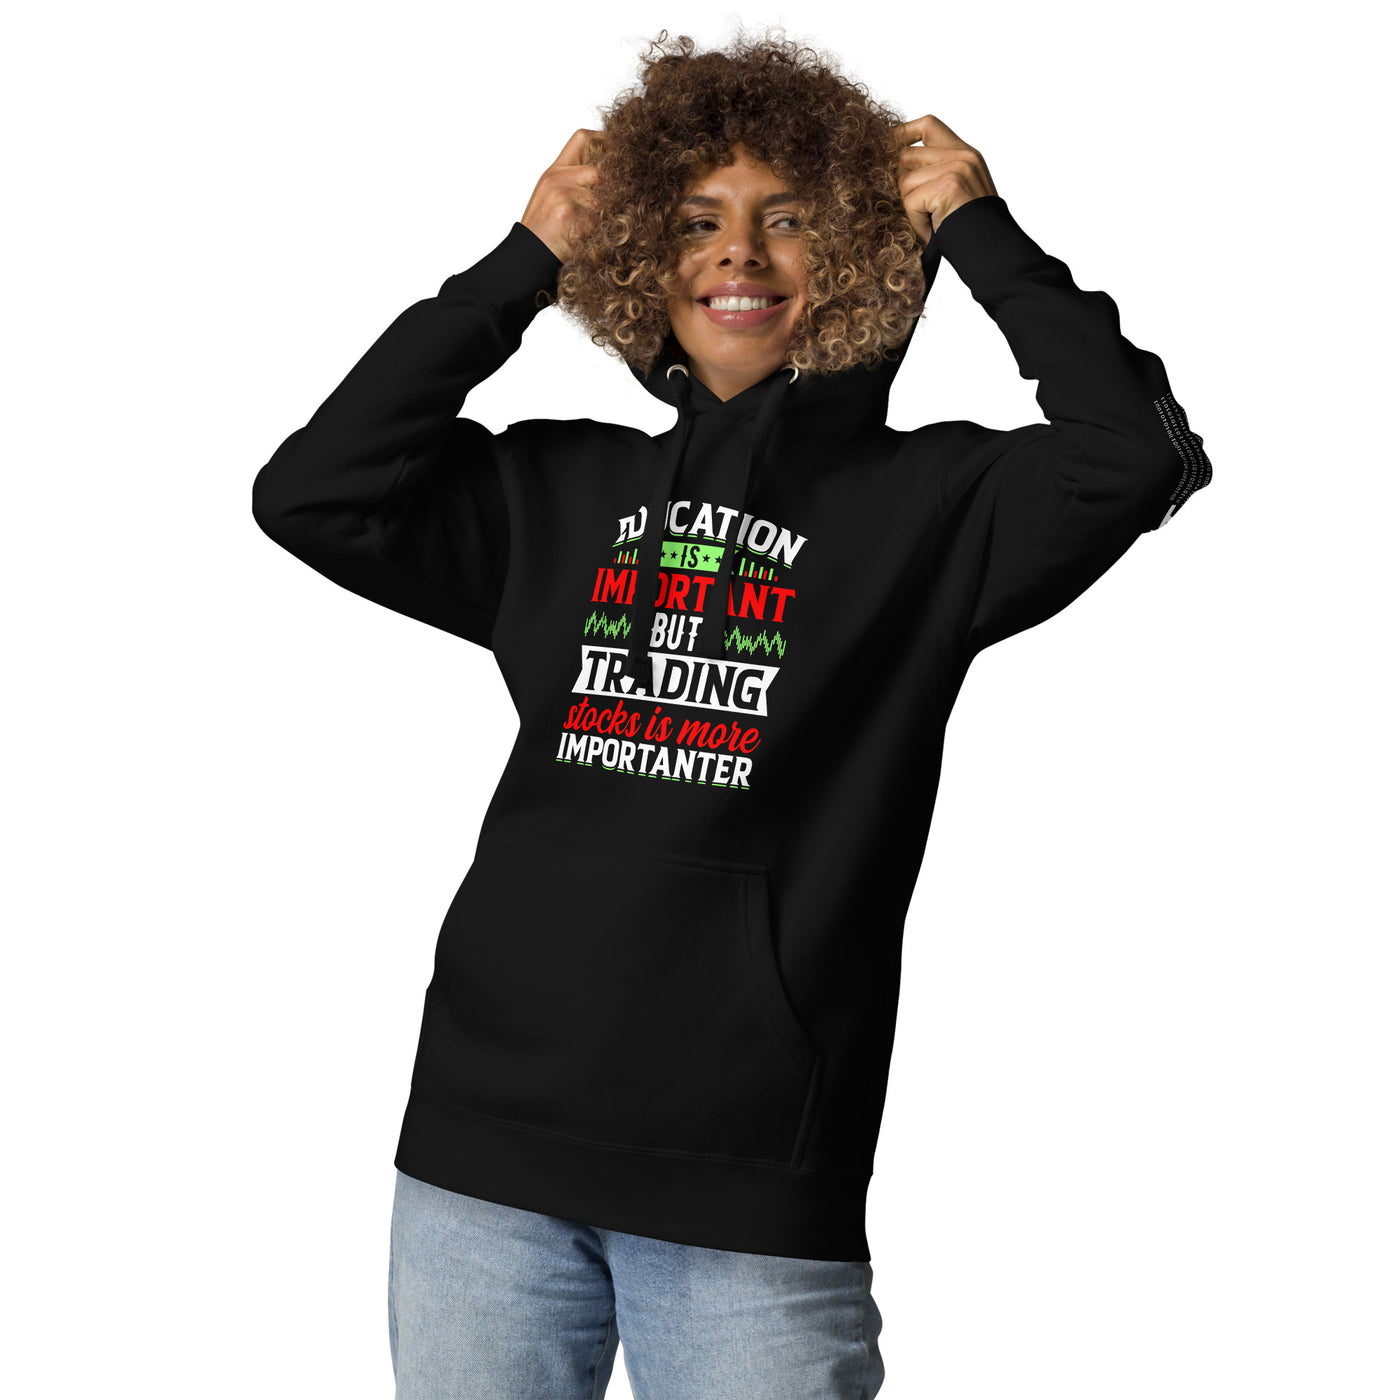 Education is important but trading stocks is more importanter - Unisex Hoodie